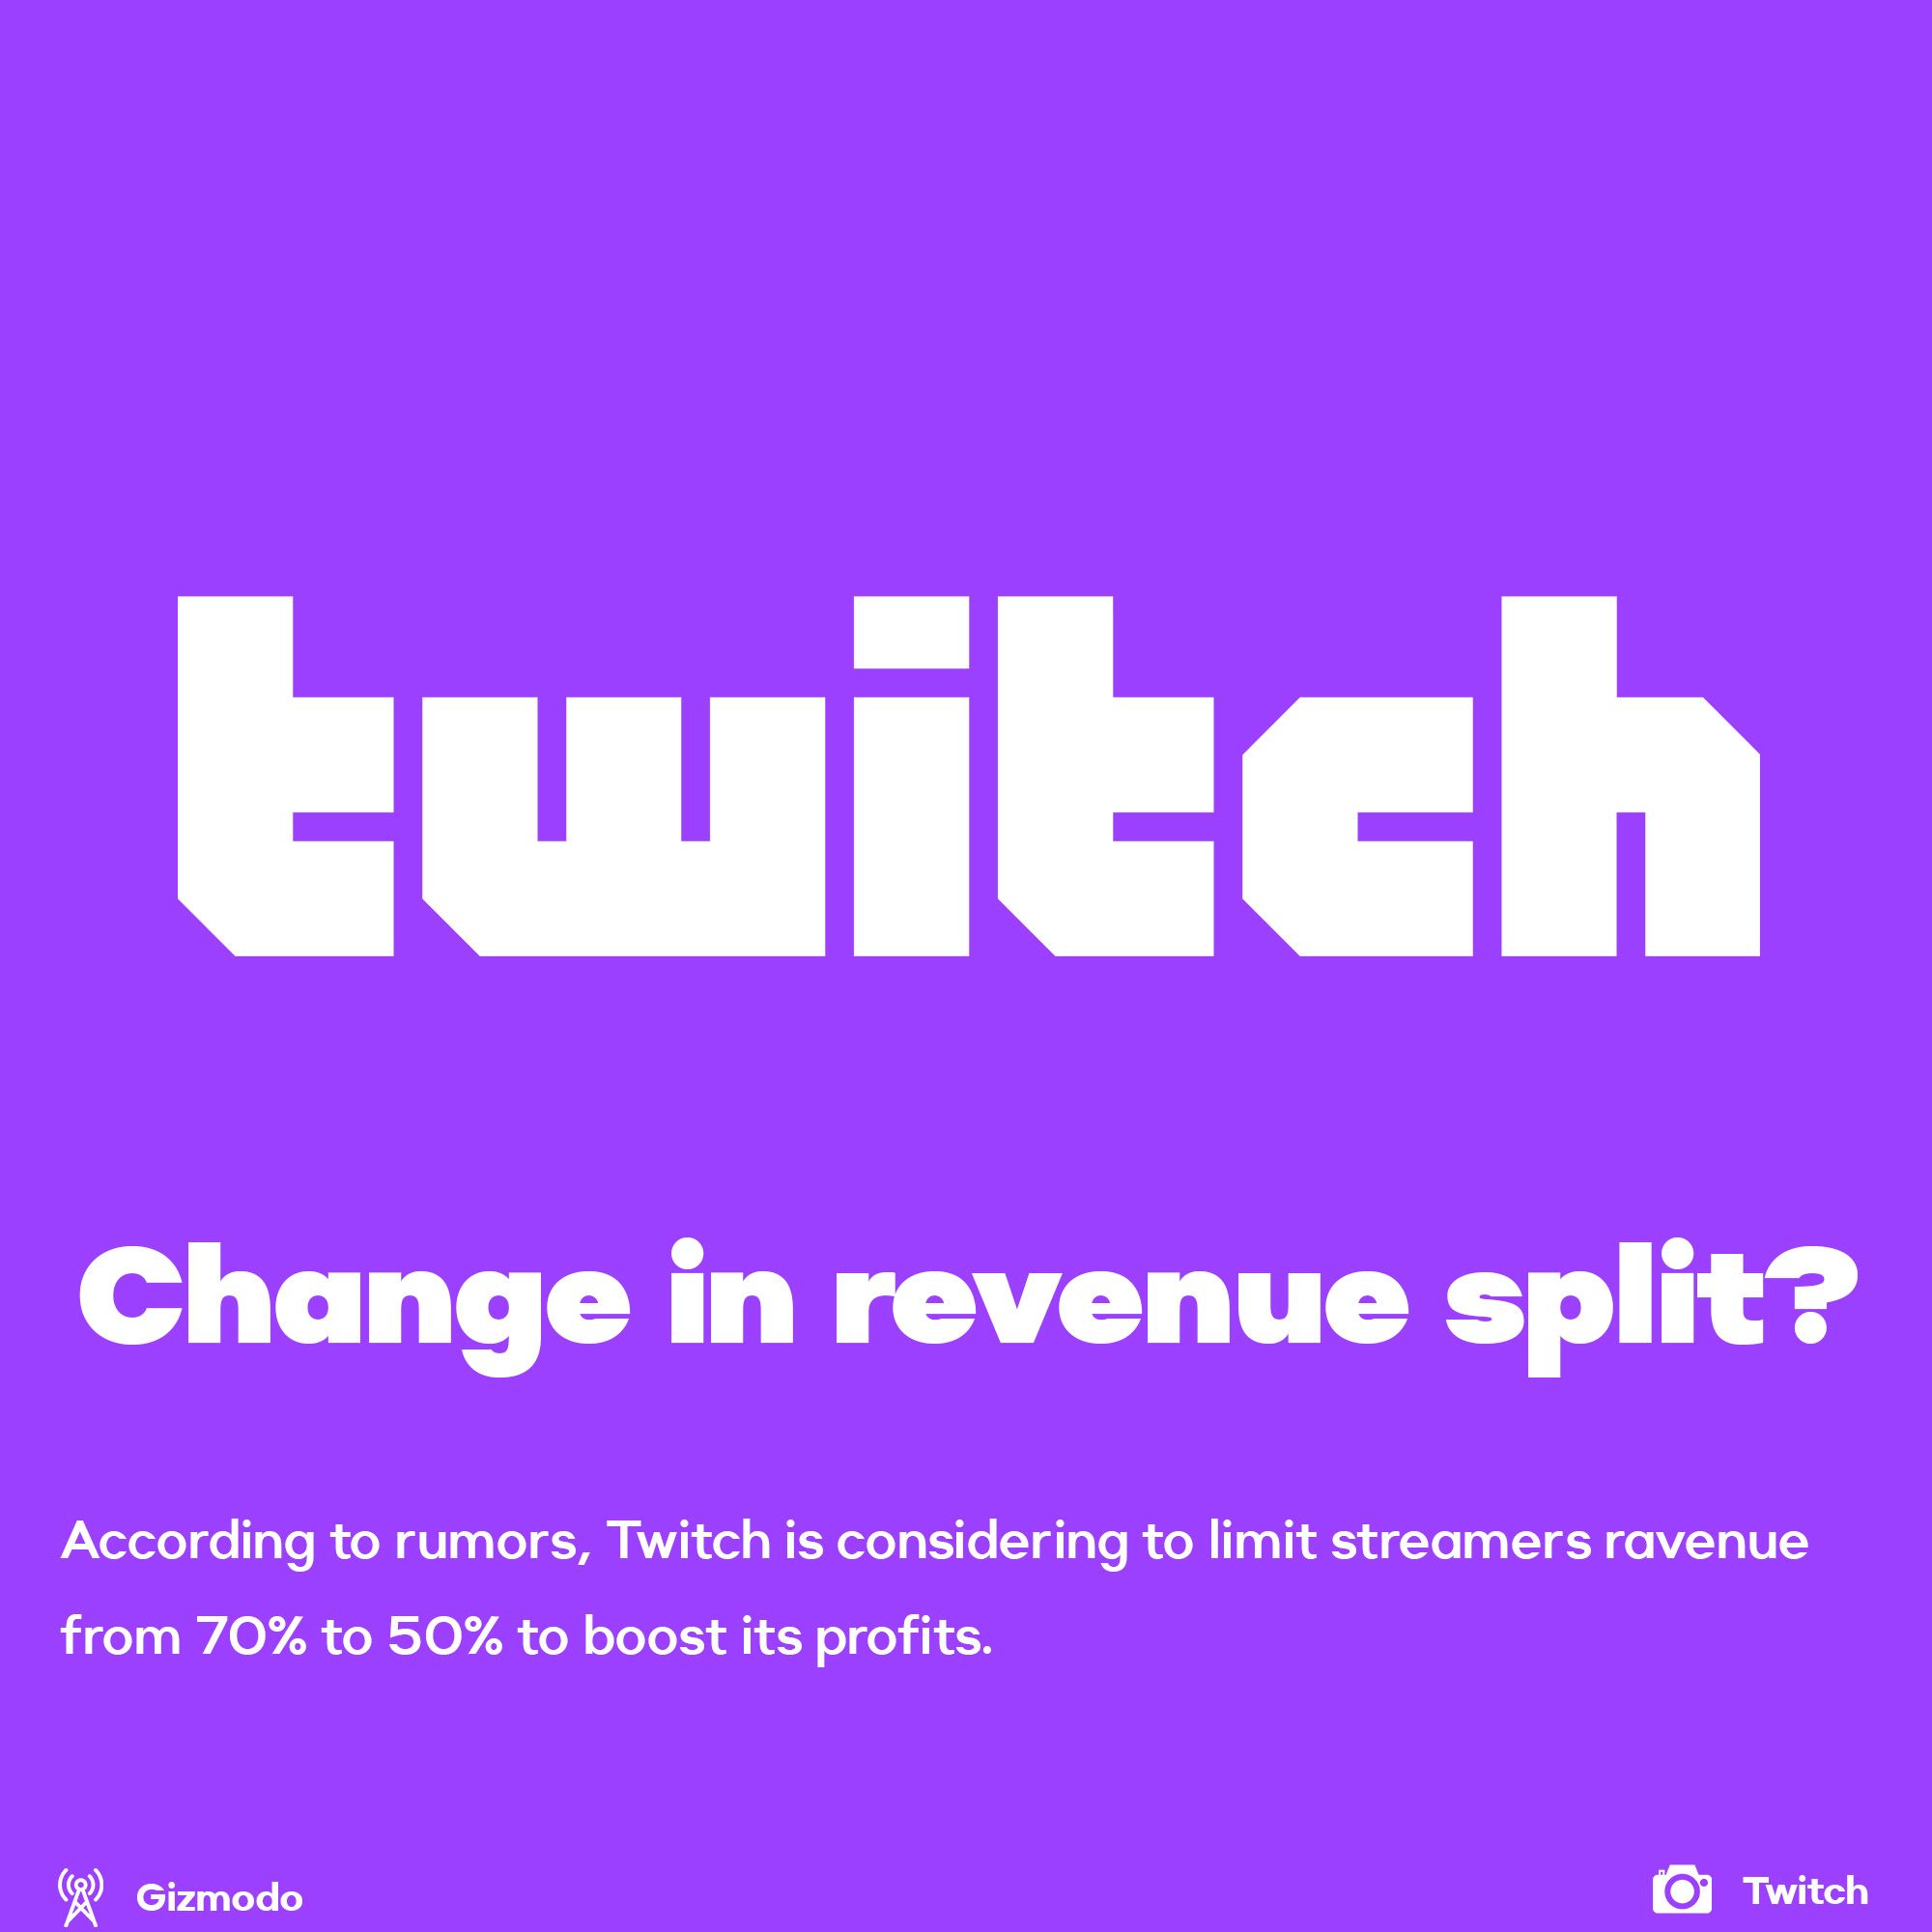 Twitch plans to cut off streamers' profits